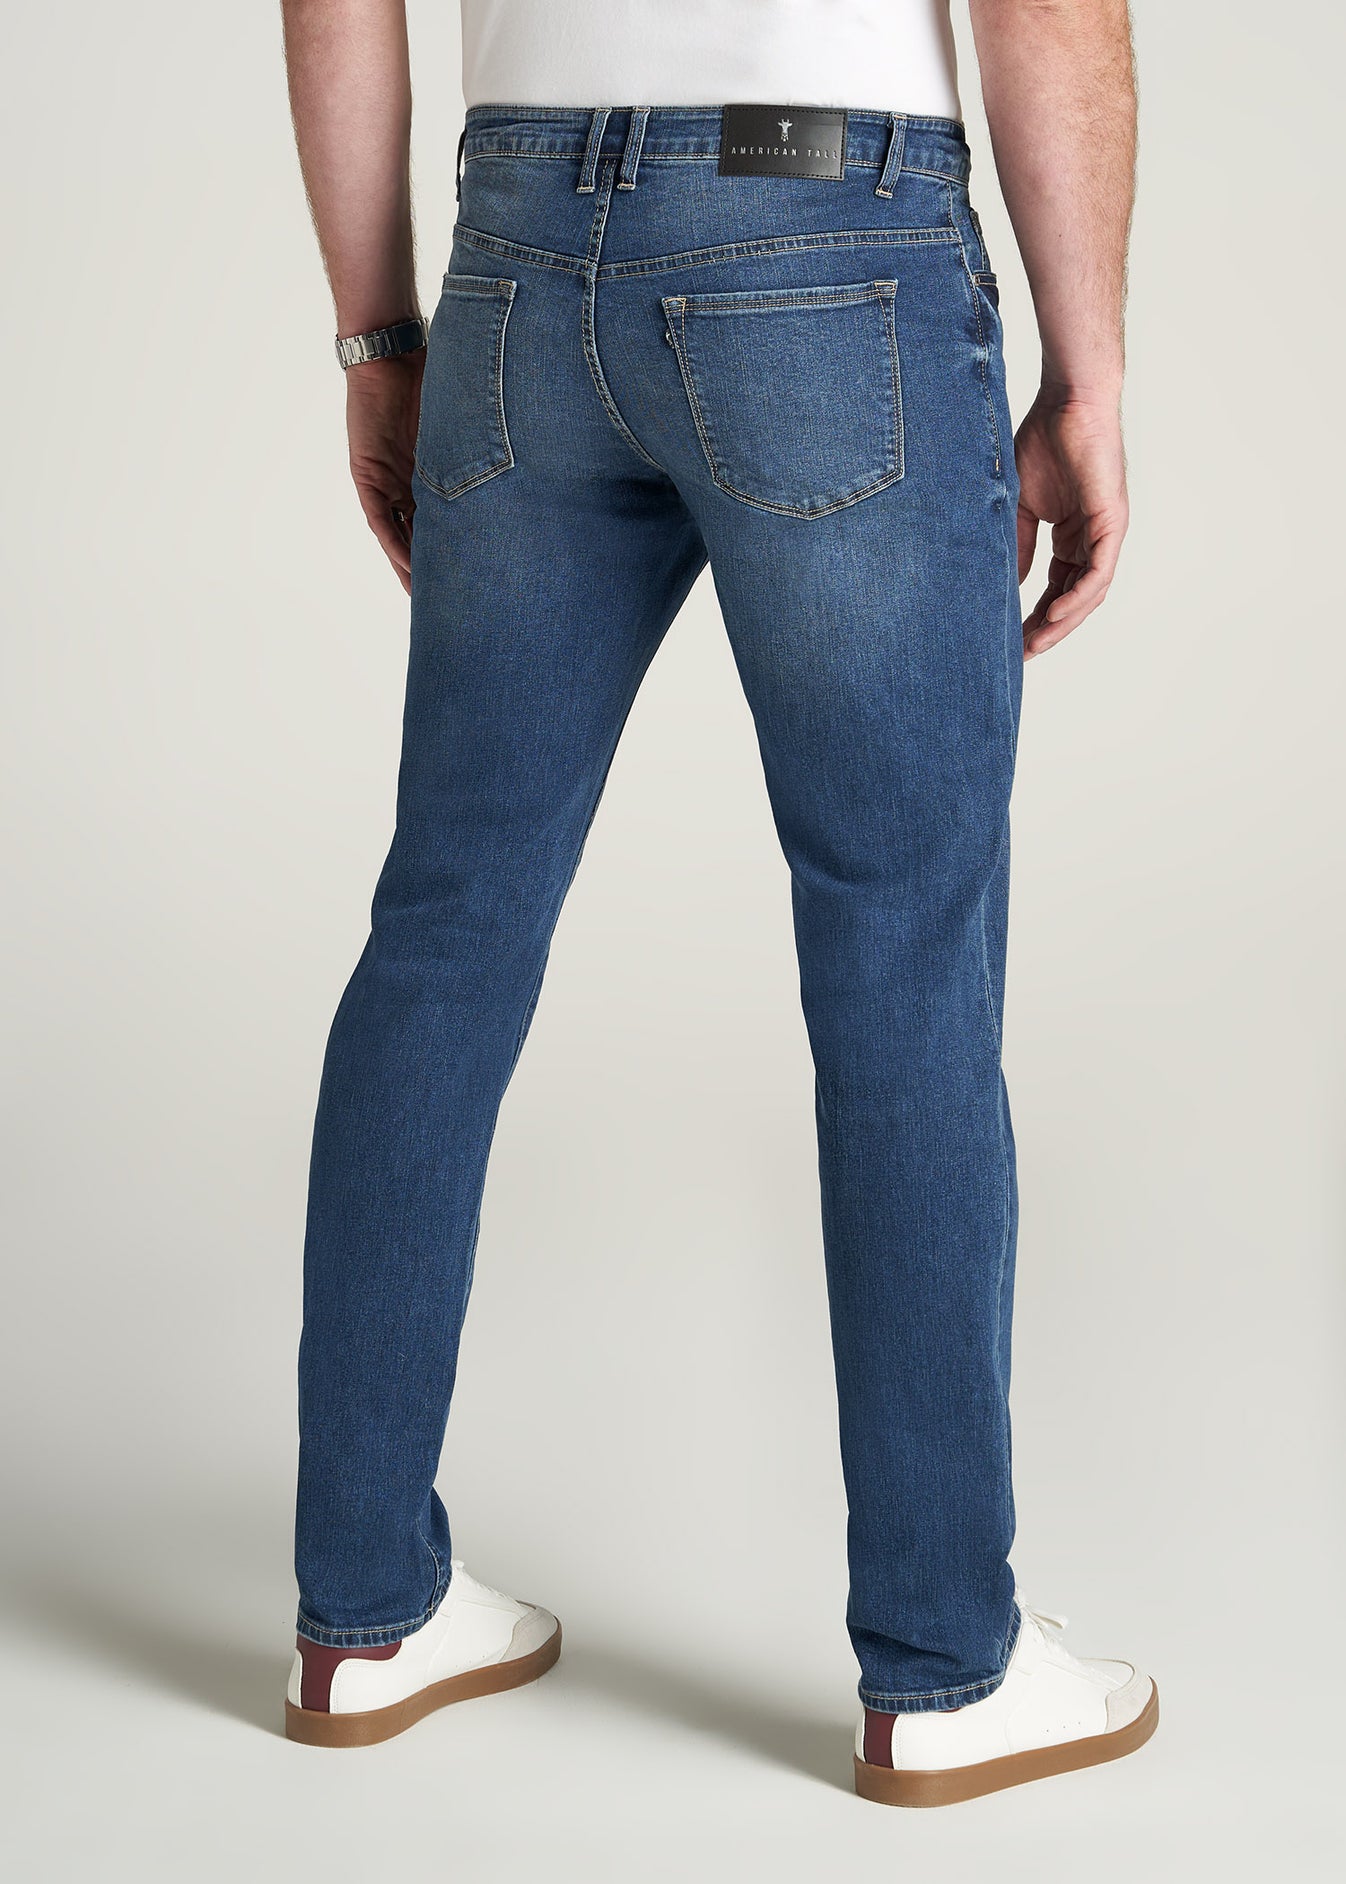 Carman Tapered Jeans For Tall Men Signature Fade | American Tall